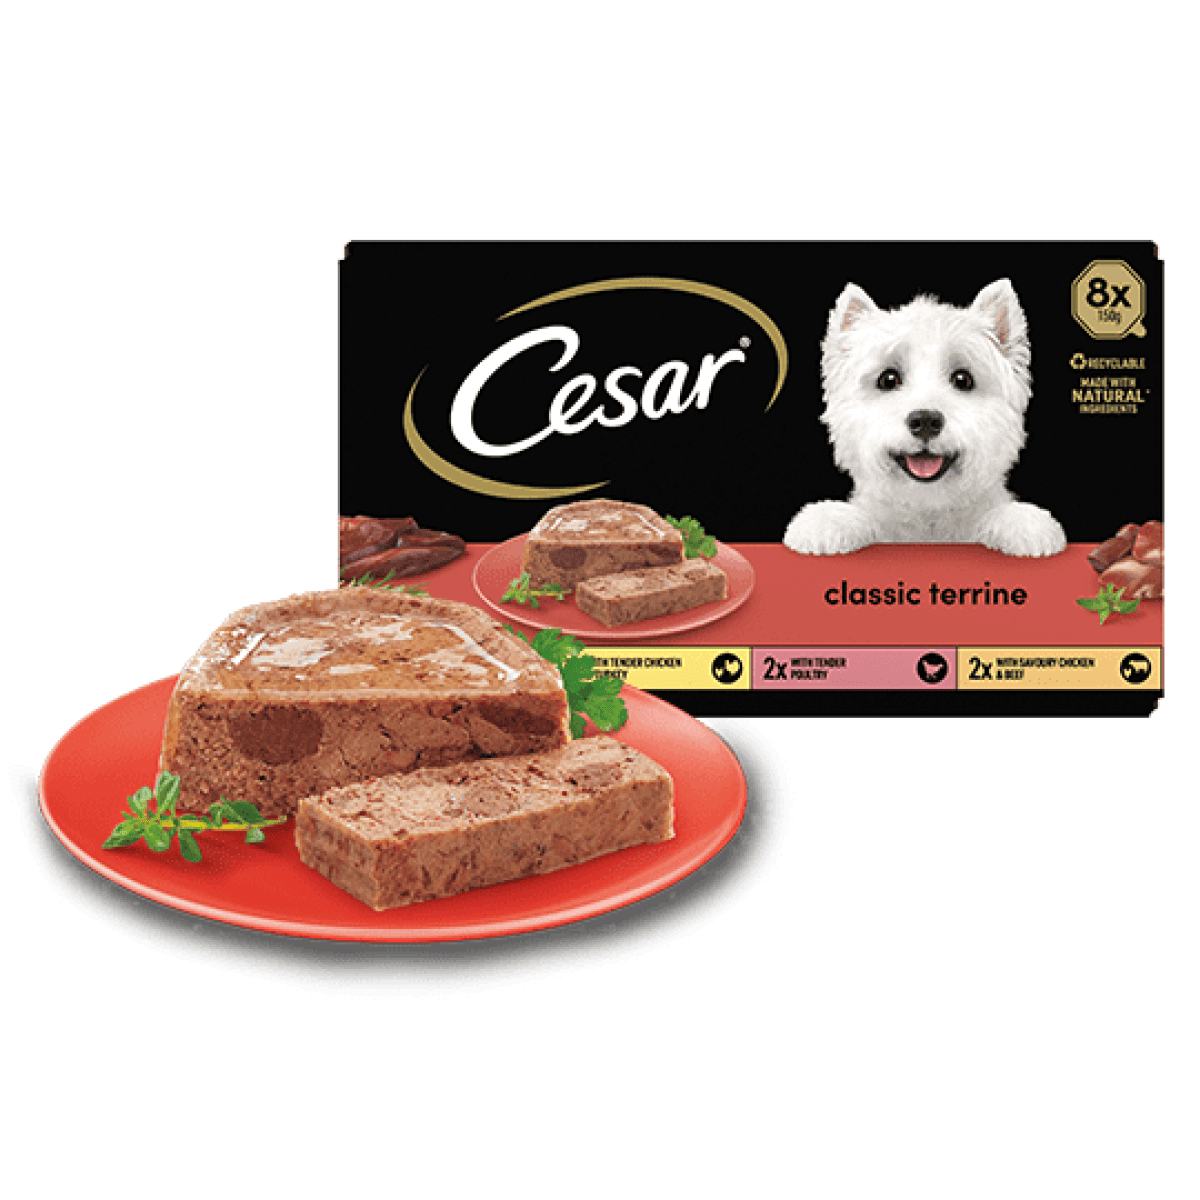 Cesar Classic Terrine Mixed Variety 8 x 150g – Pawfect Supplies Ltd Product Image